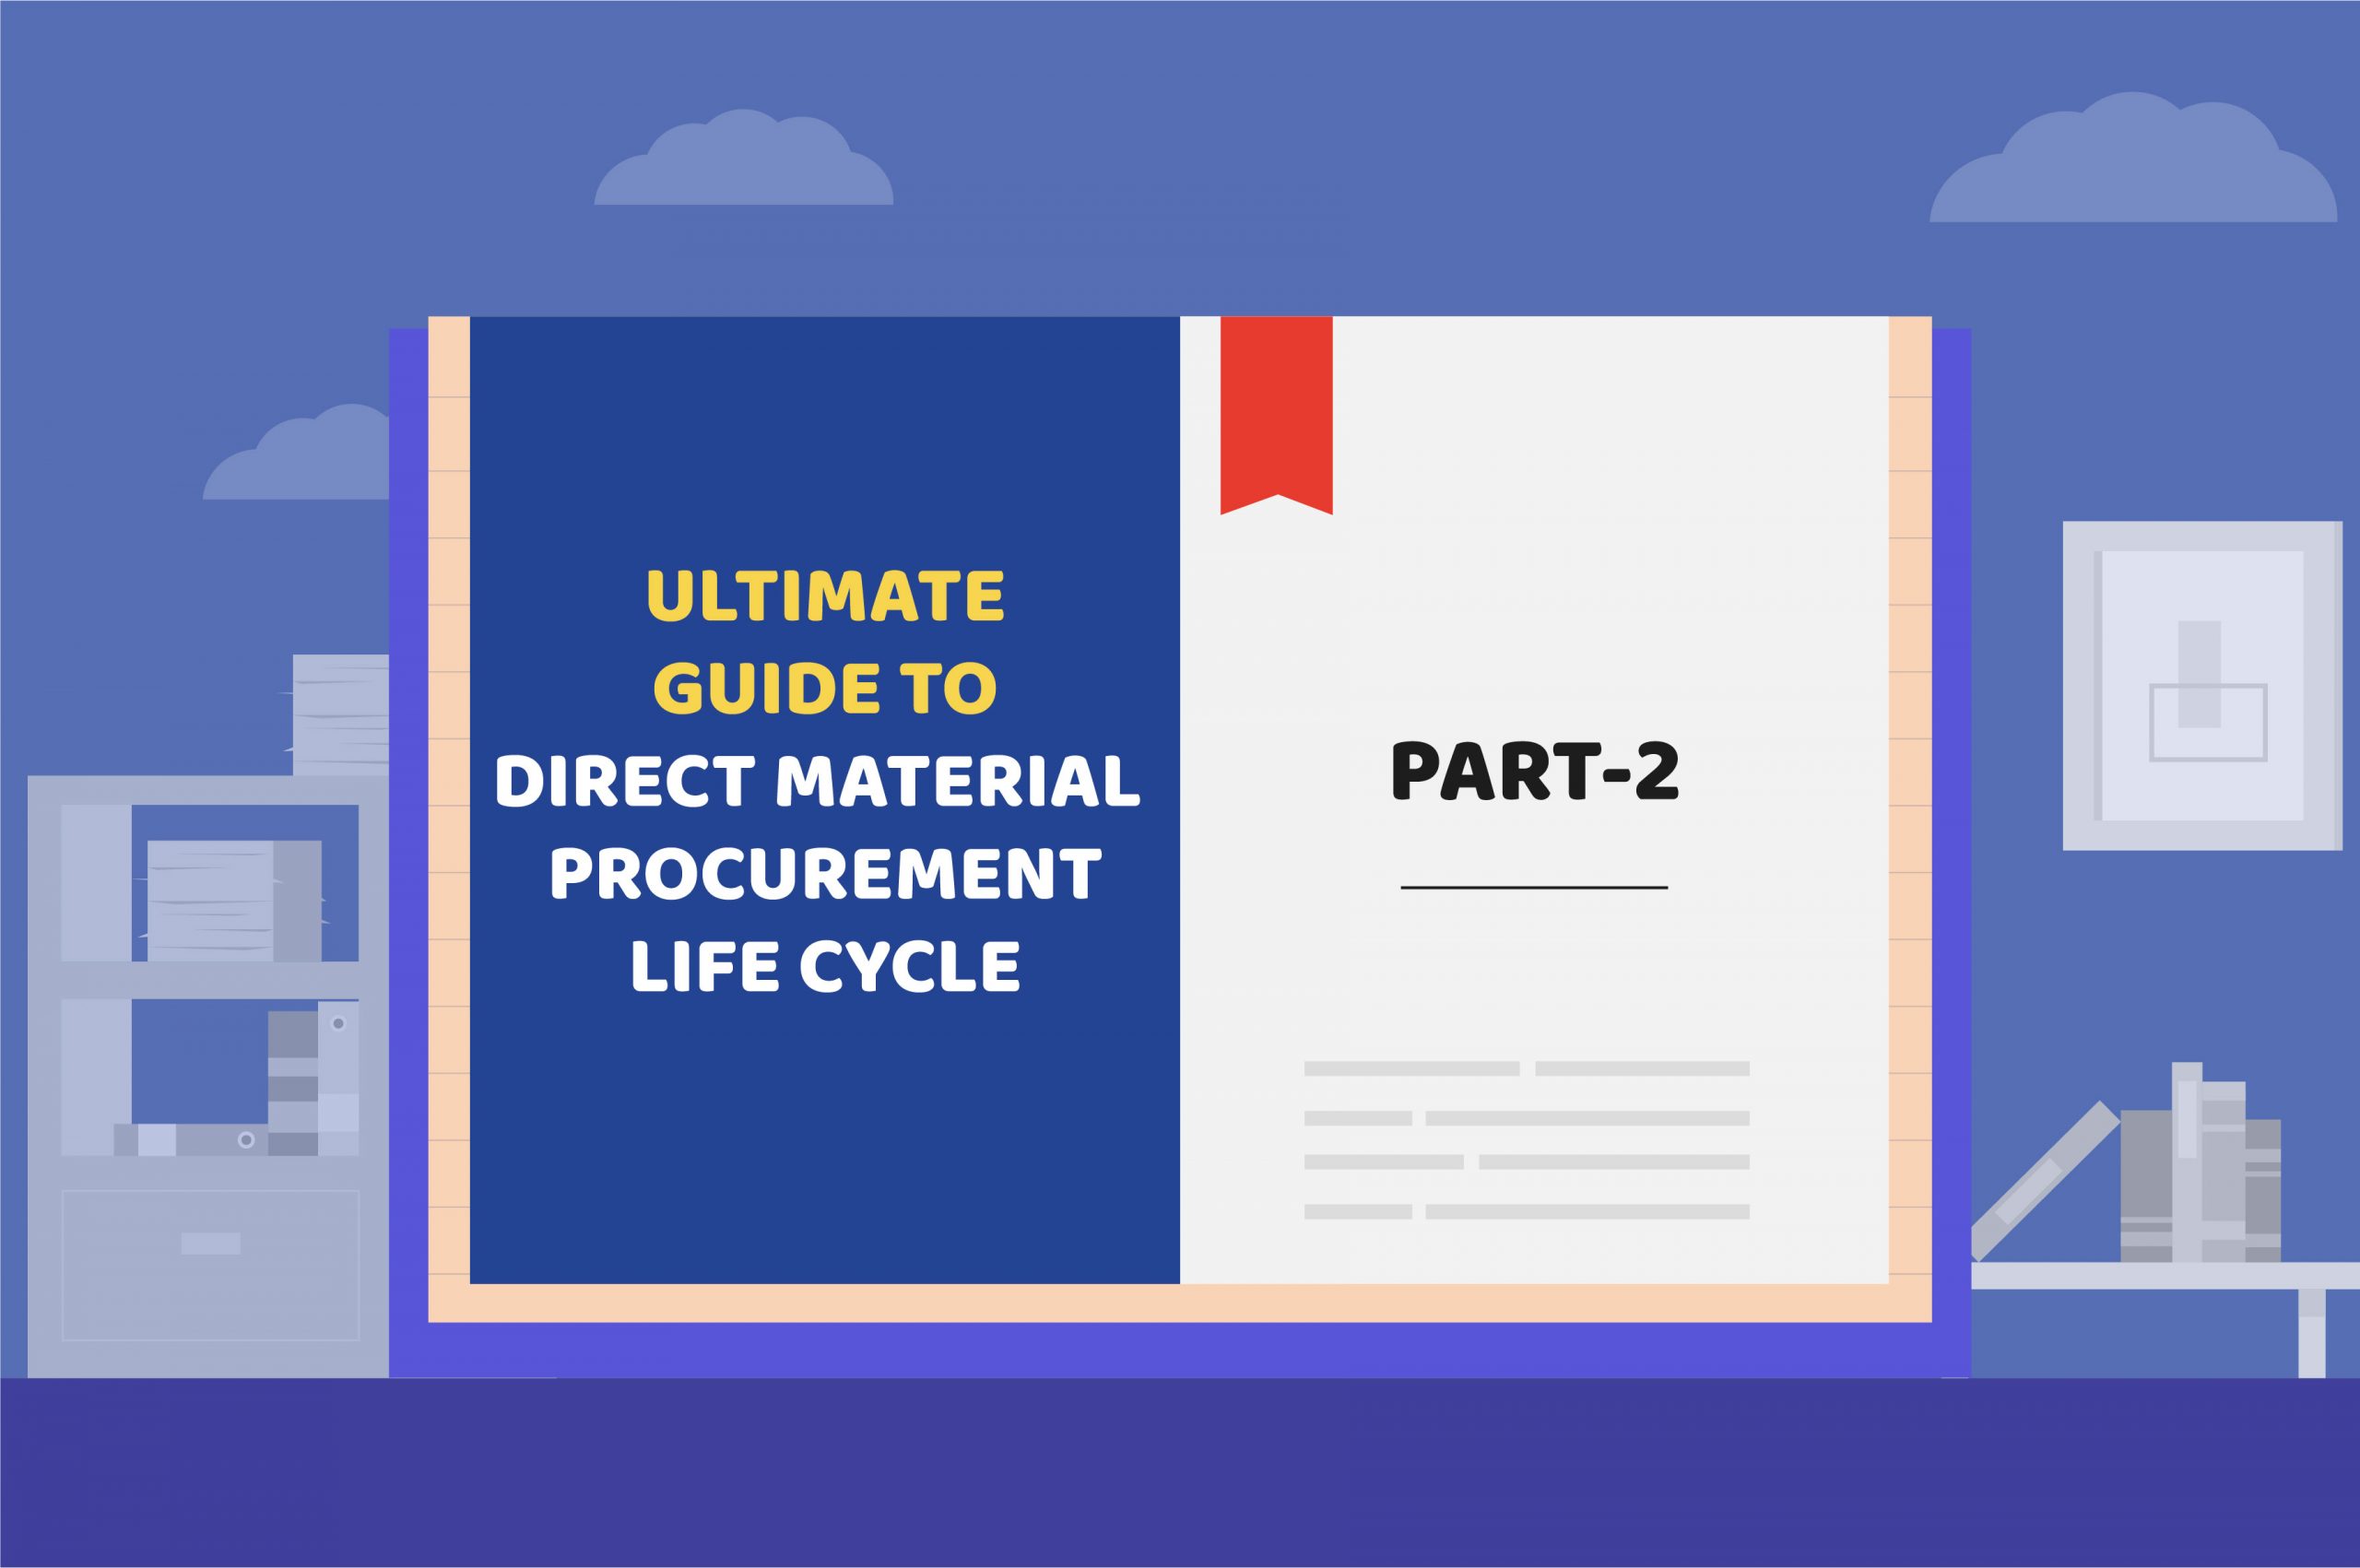 Direct Material Procurement Life Cycle Guide - Part 2